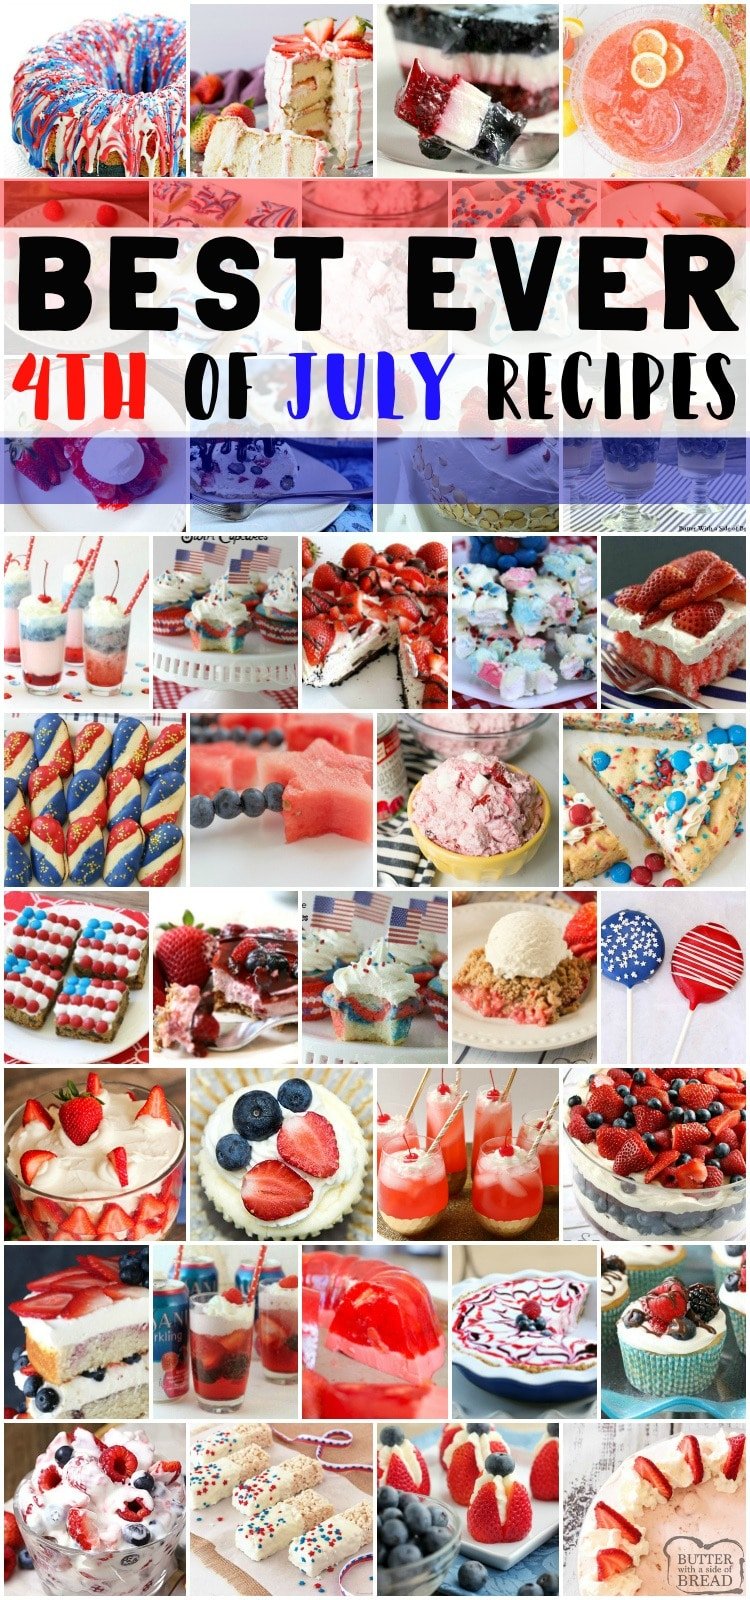 4th of July Dessert recipes that are sweet, festive and perfectly patriotic! Easy red, white & blue recipes that come together fast and everyone loves! #patriotic #4thofjuly #dessert #recipesfrom Butter With a Side of Bread